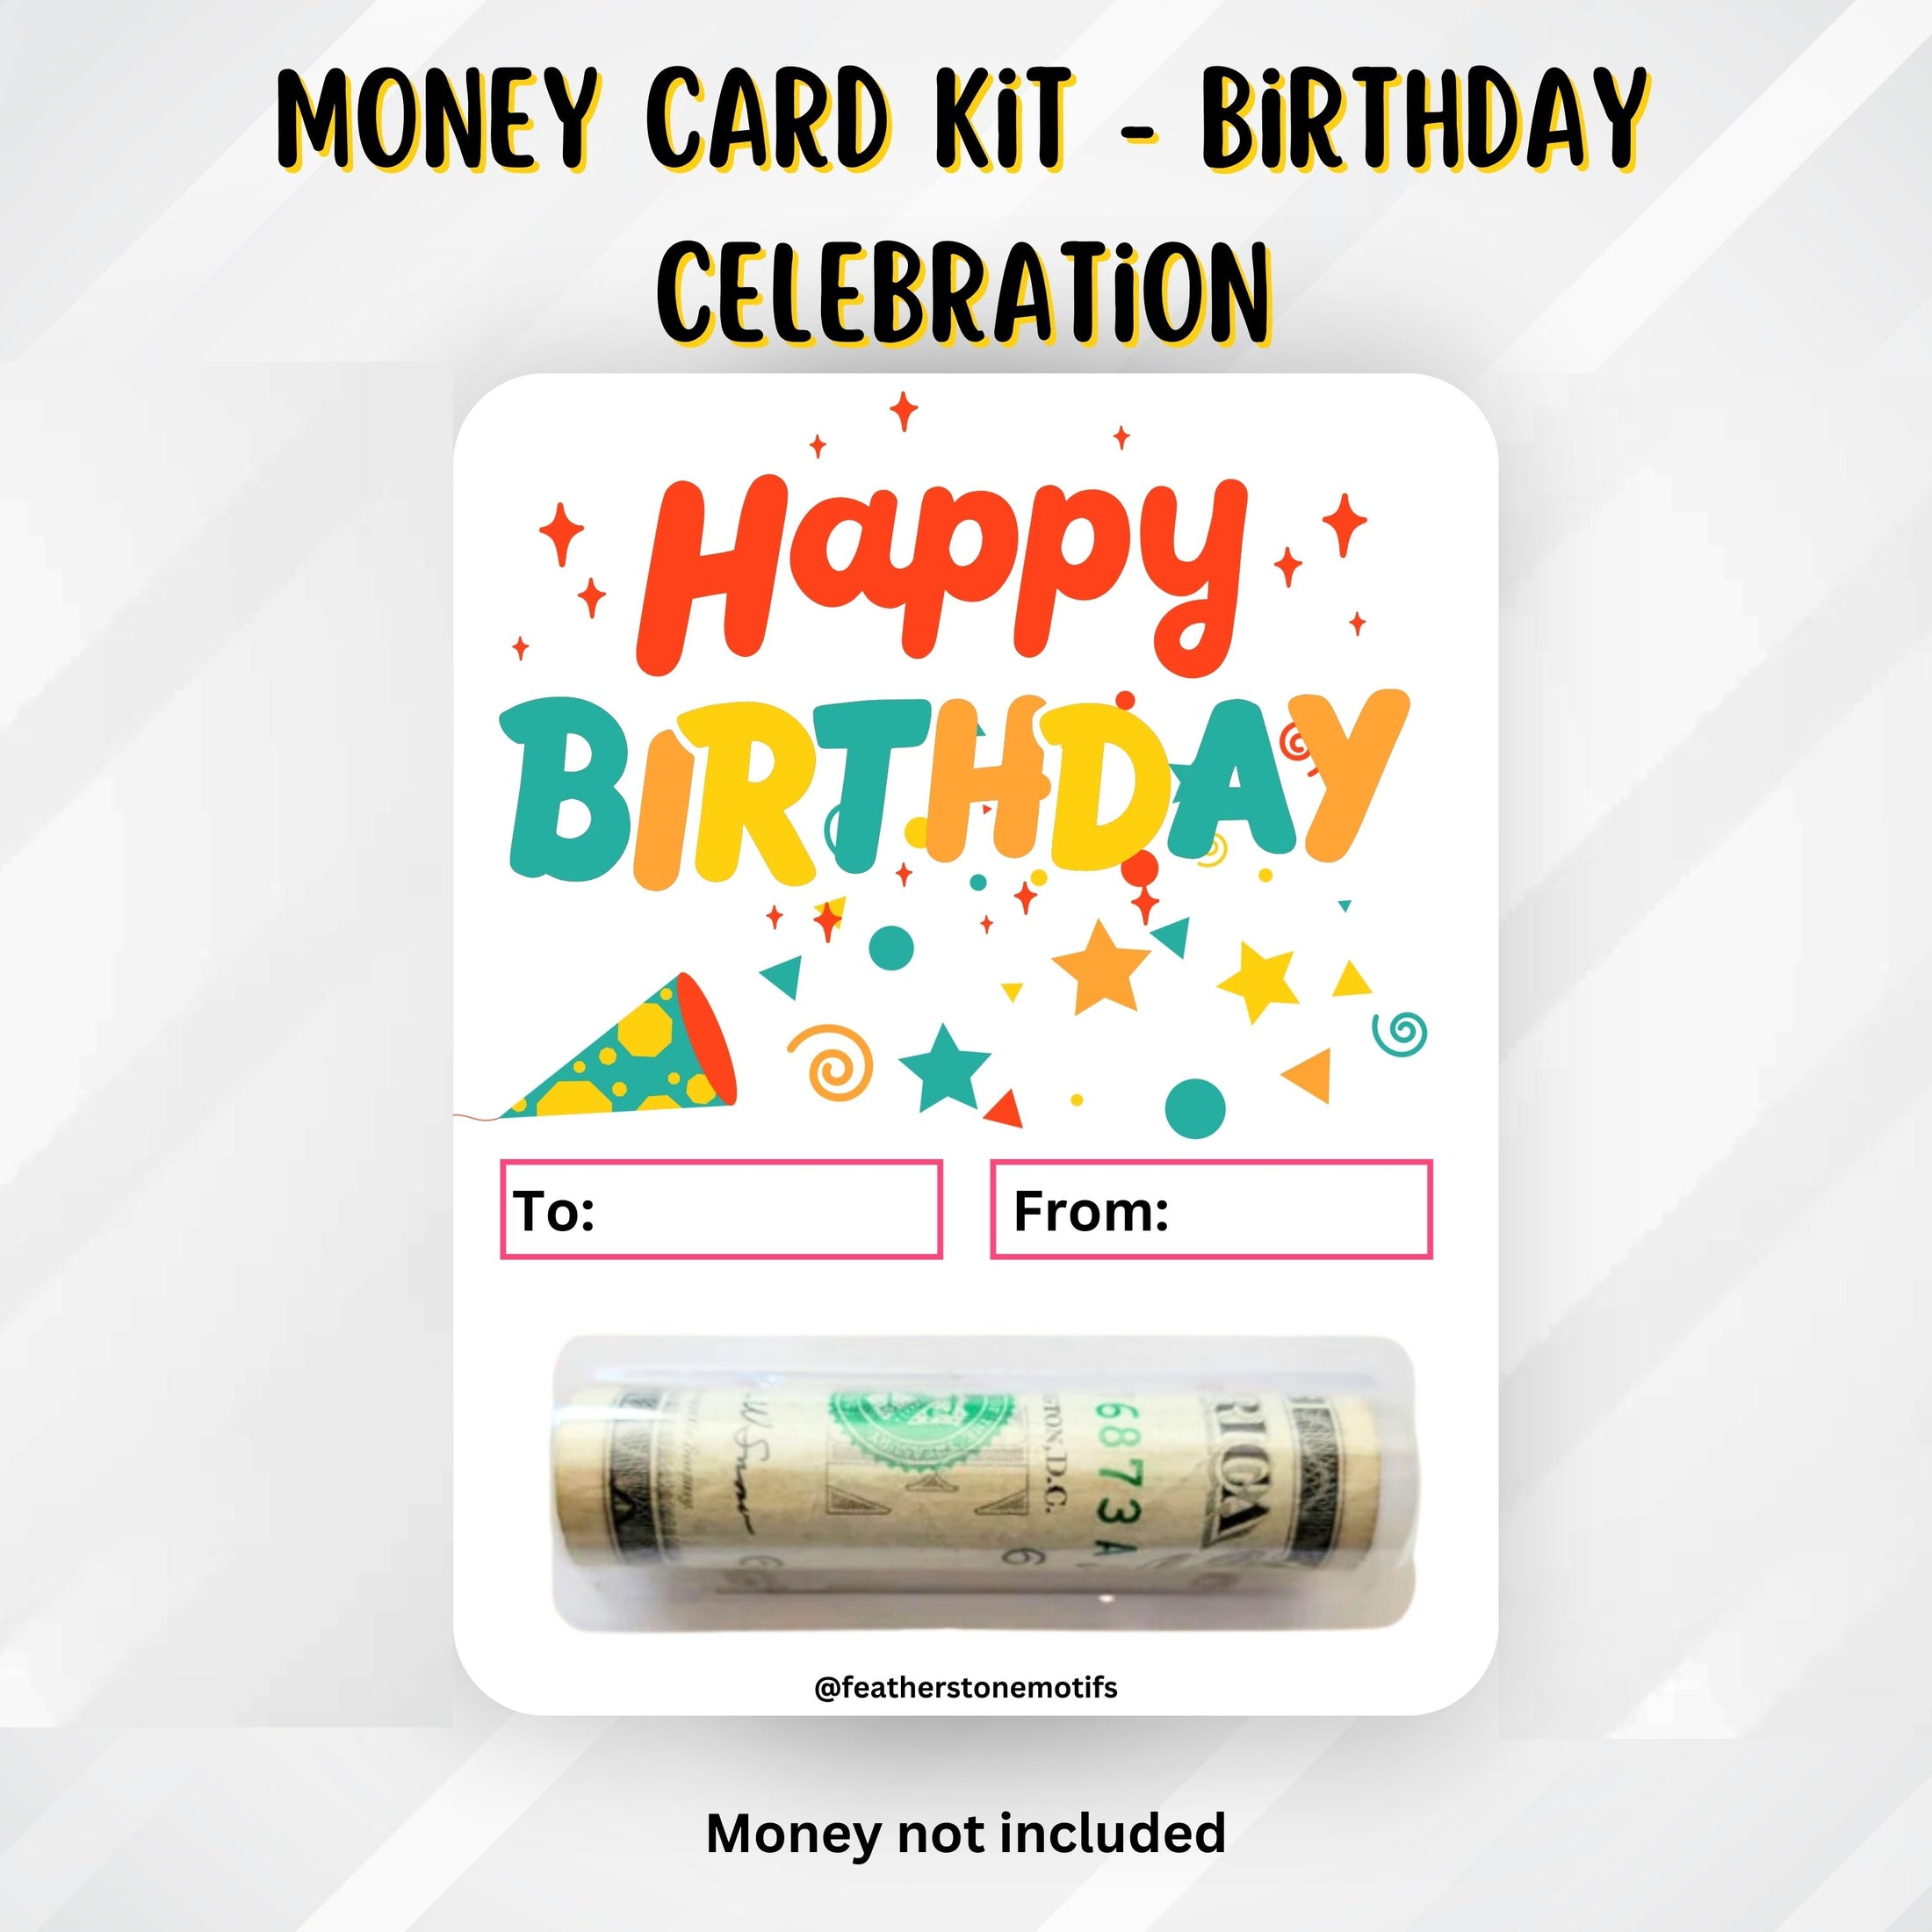 This image shows the money tube attached to the Birthday Celebration money card.